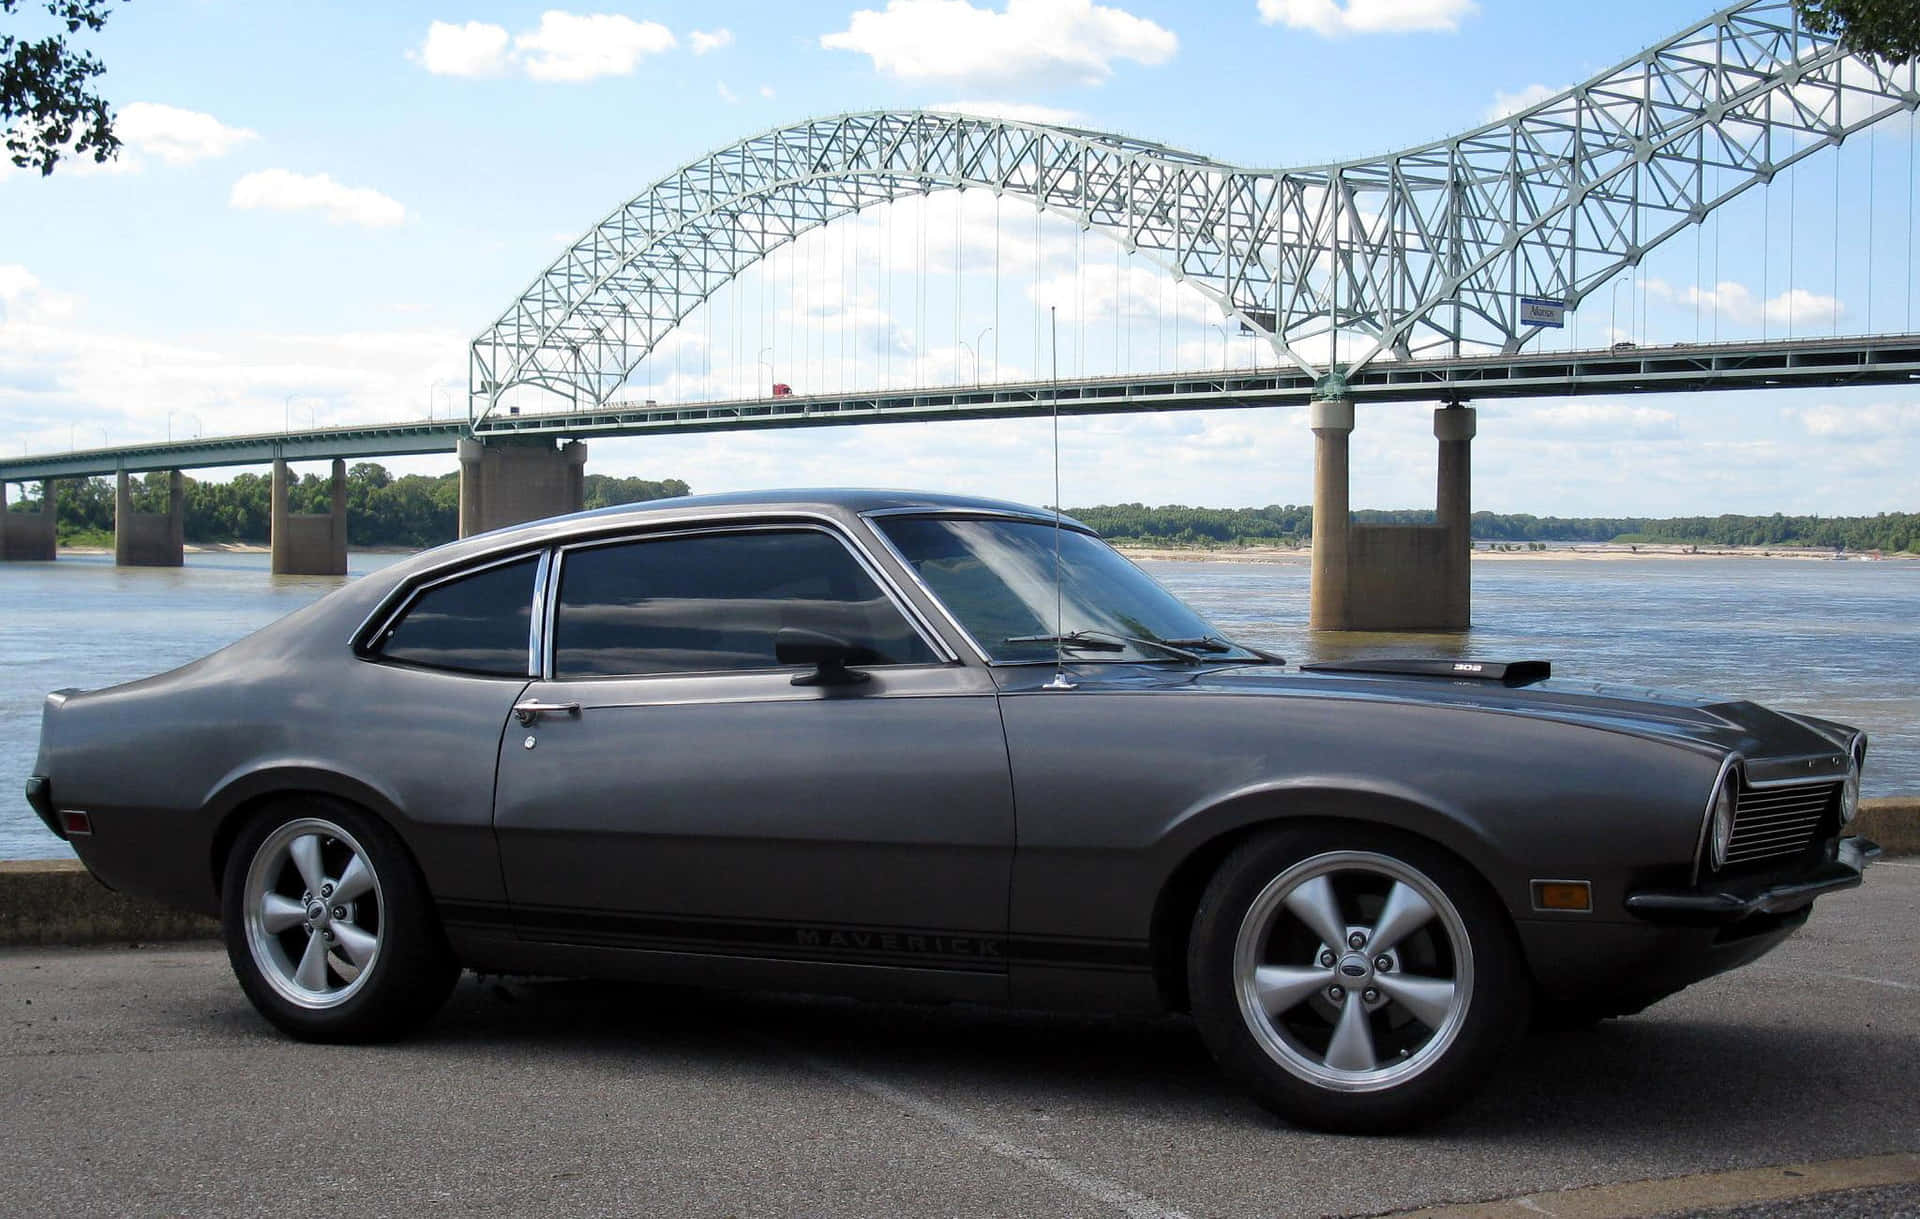 A Gray Car Parked In Front Of A Bridge